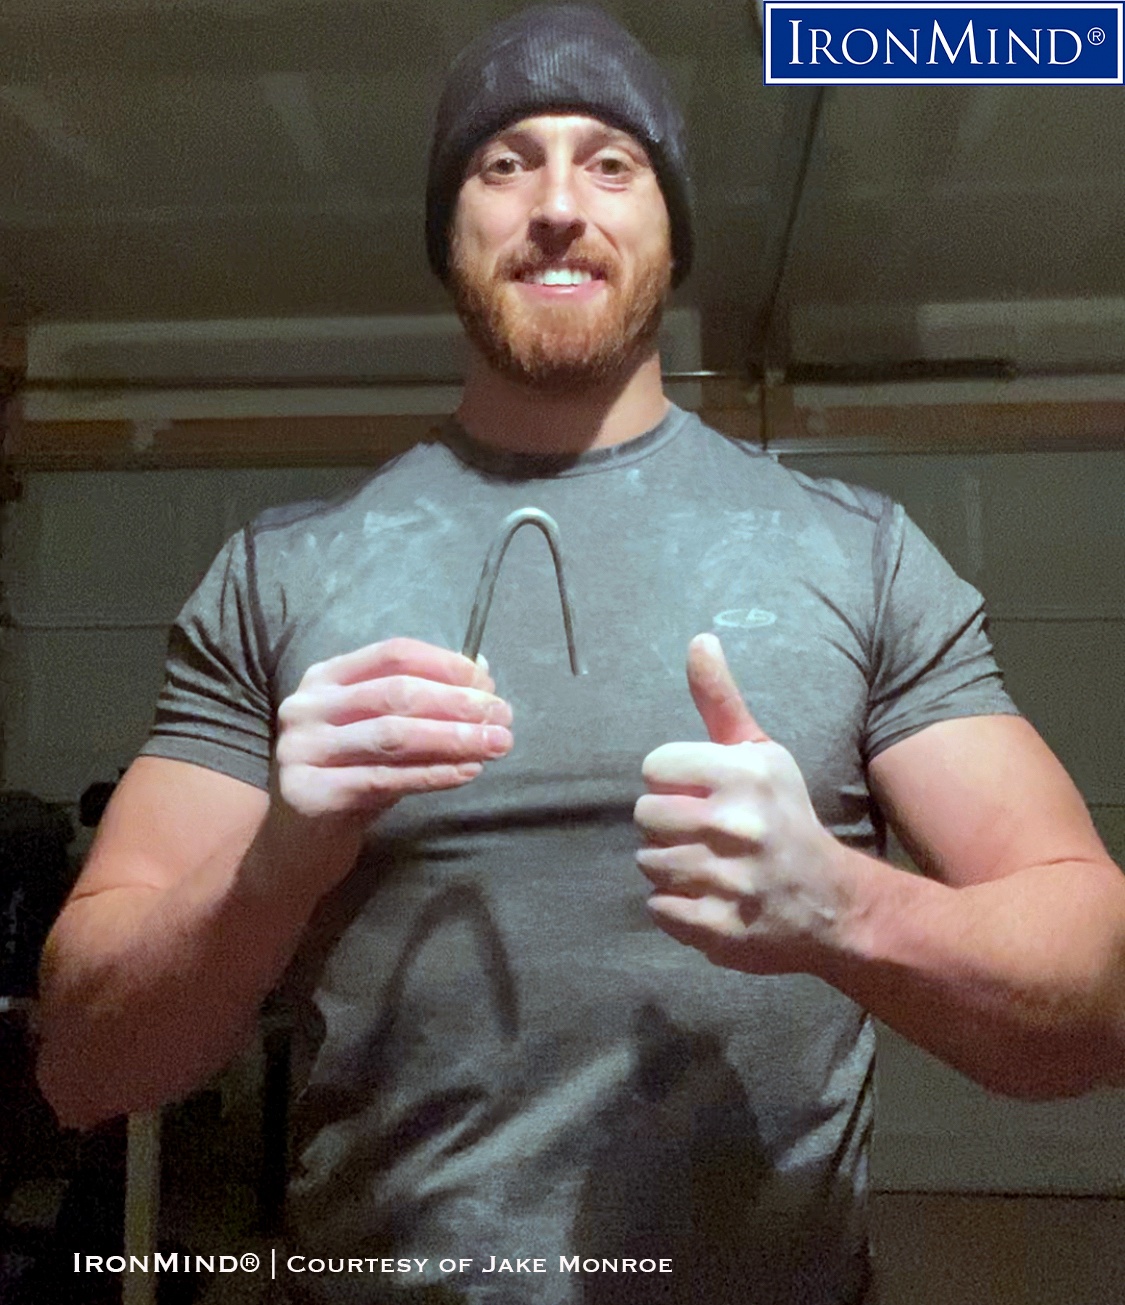 Drug-free powerlifter Jake Monroe has just been certified on the IronMind Red Nail. A Ph.D. student in exercise physiology who enjoys birding, hiking and “excellent Scotch whiskeys,” Monroe is 32 years old, 6 feet tall and weighs 202 lb. IronMind® | Courtesy of Jake Monroe